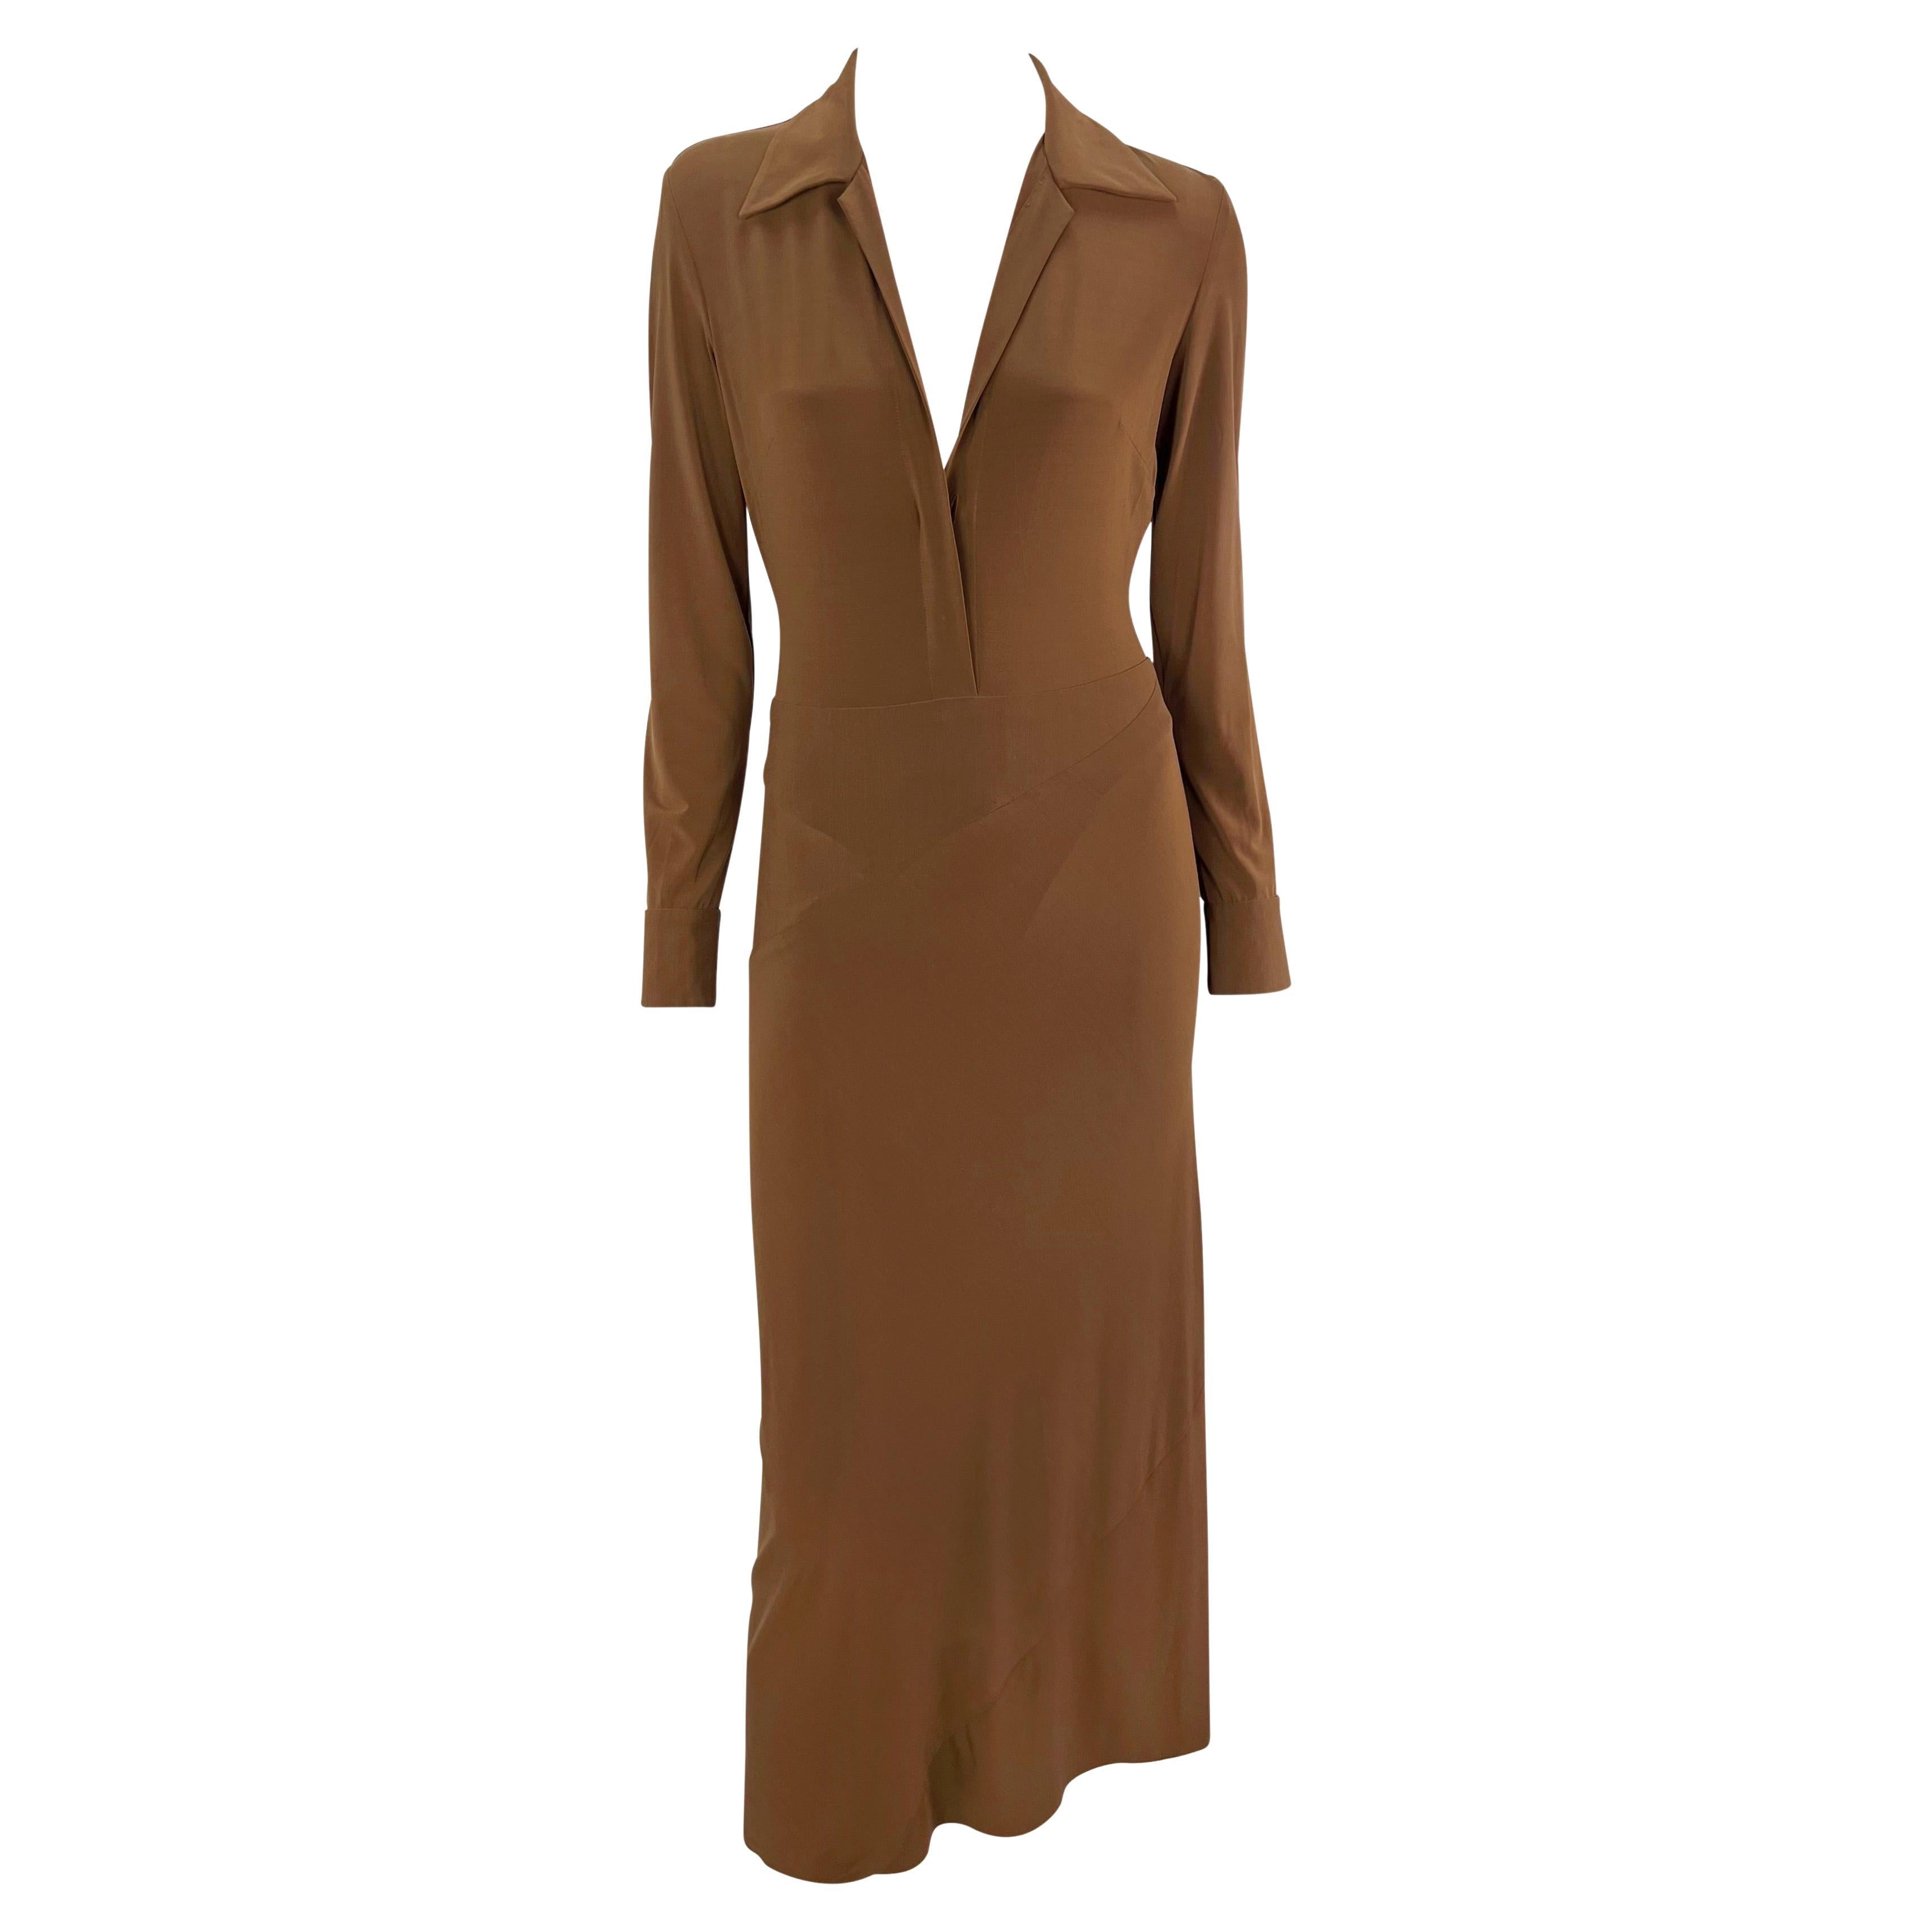 S/S 1996 Donna Karan Runway Light Brown Plunging Bodycon Dress For Sale